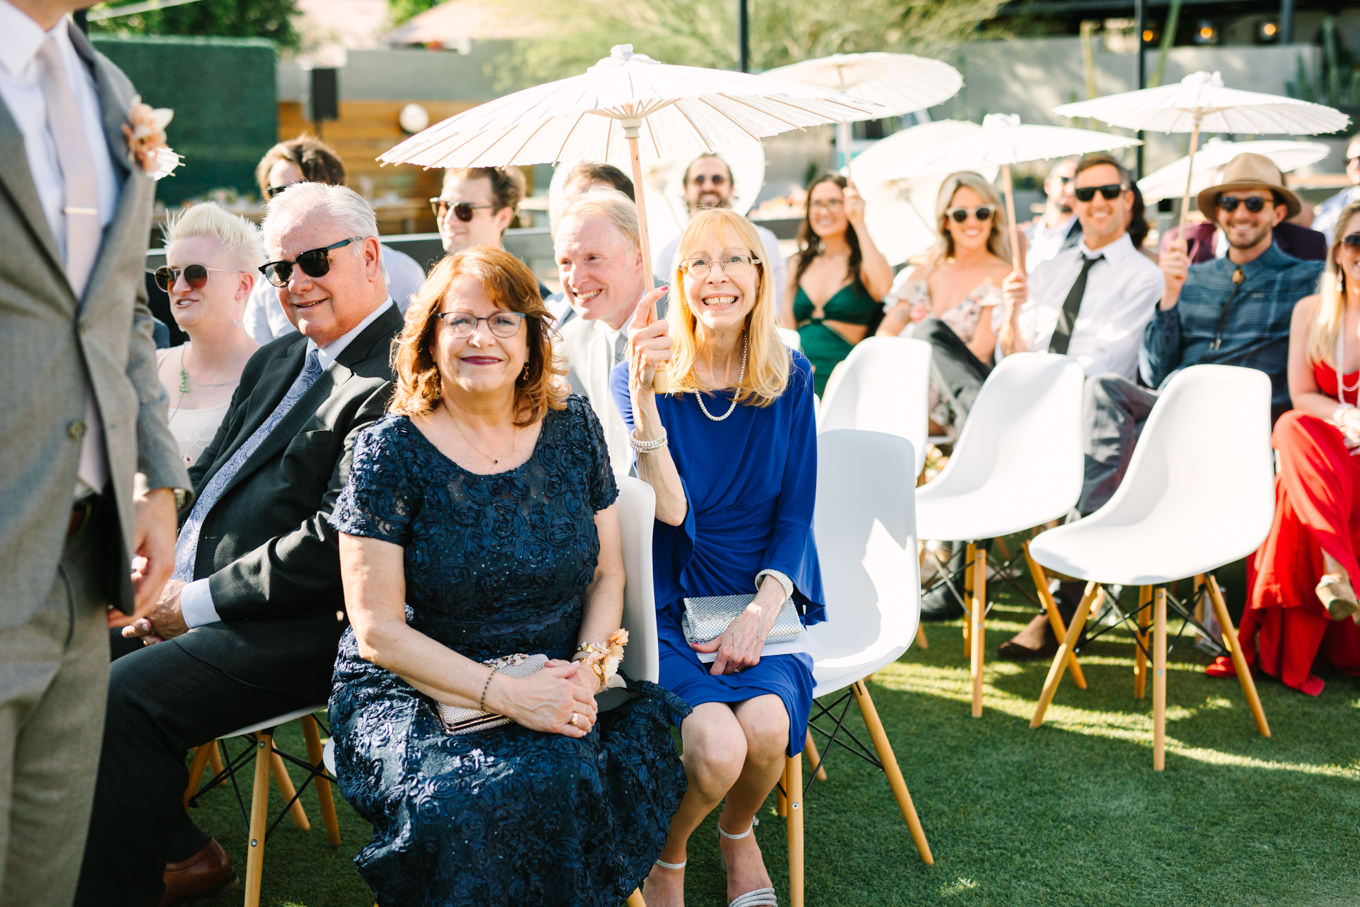 Laughing wedding guests | Pink and orange Lautner Compound wedding | Colorful Palm Springs wedding photography | #palmspringsphotographer #palmspringswedding #lautnercompound #southerncaliforniawedding  Source: Mary Costa Photography | Los Angeles